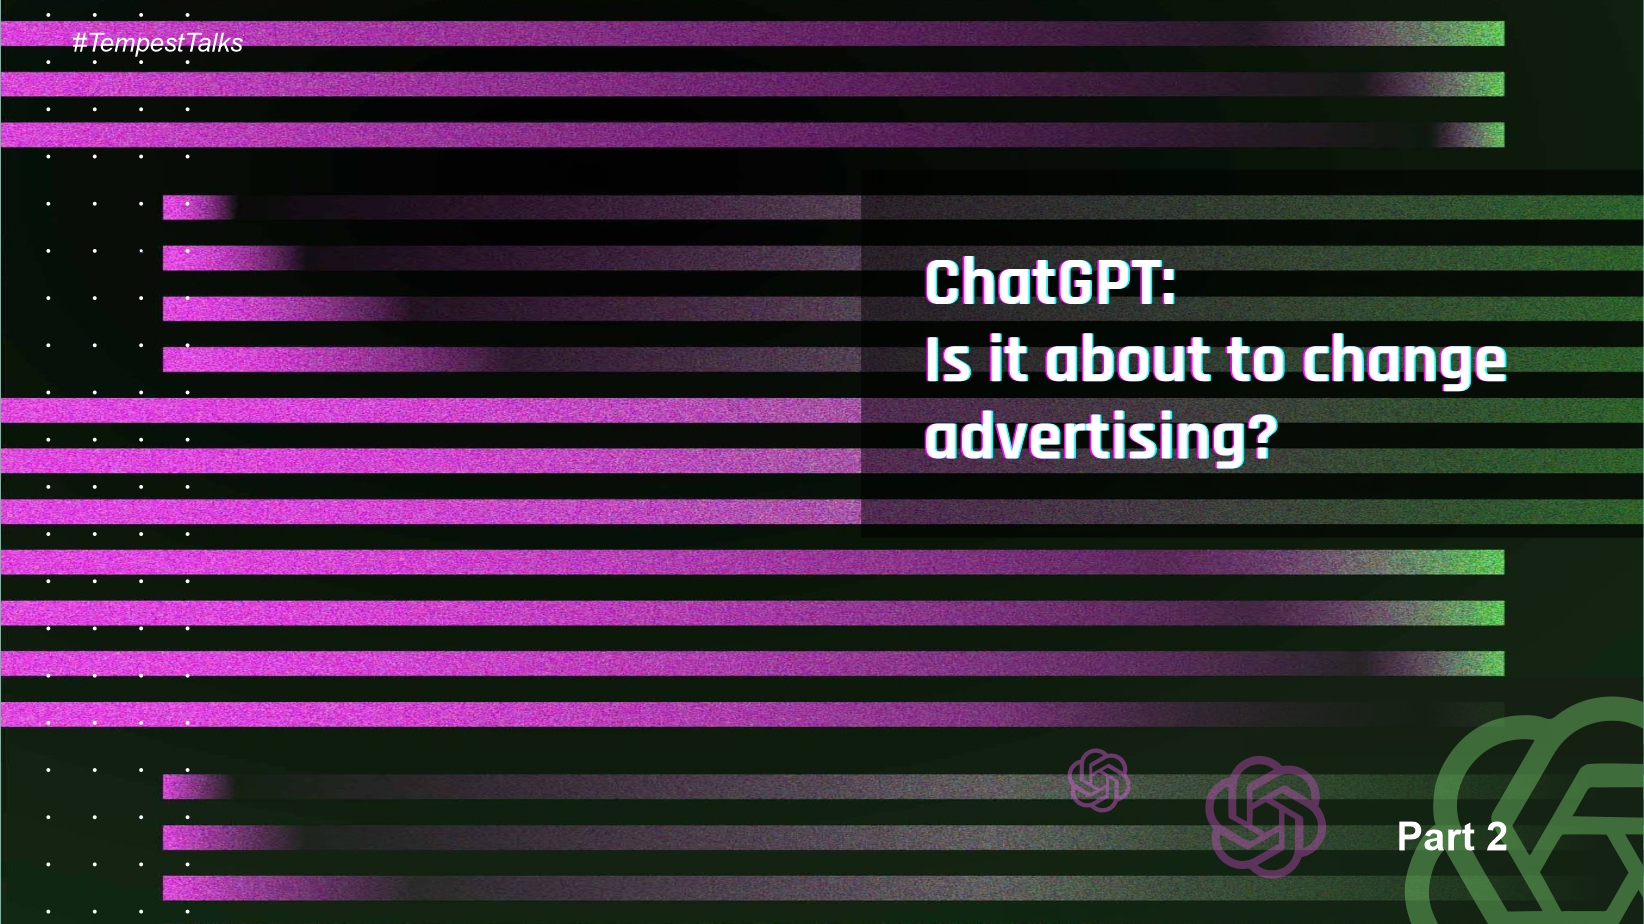 ChatGPT: Is it about to change advertising?